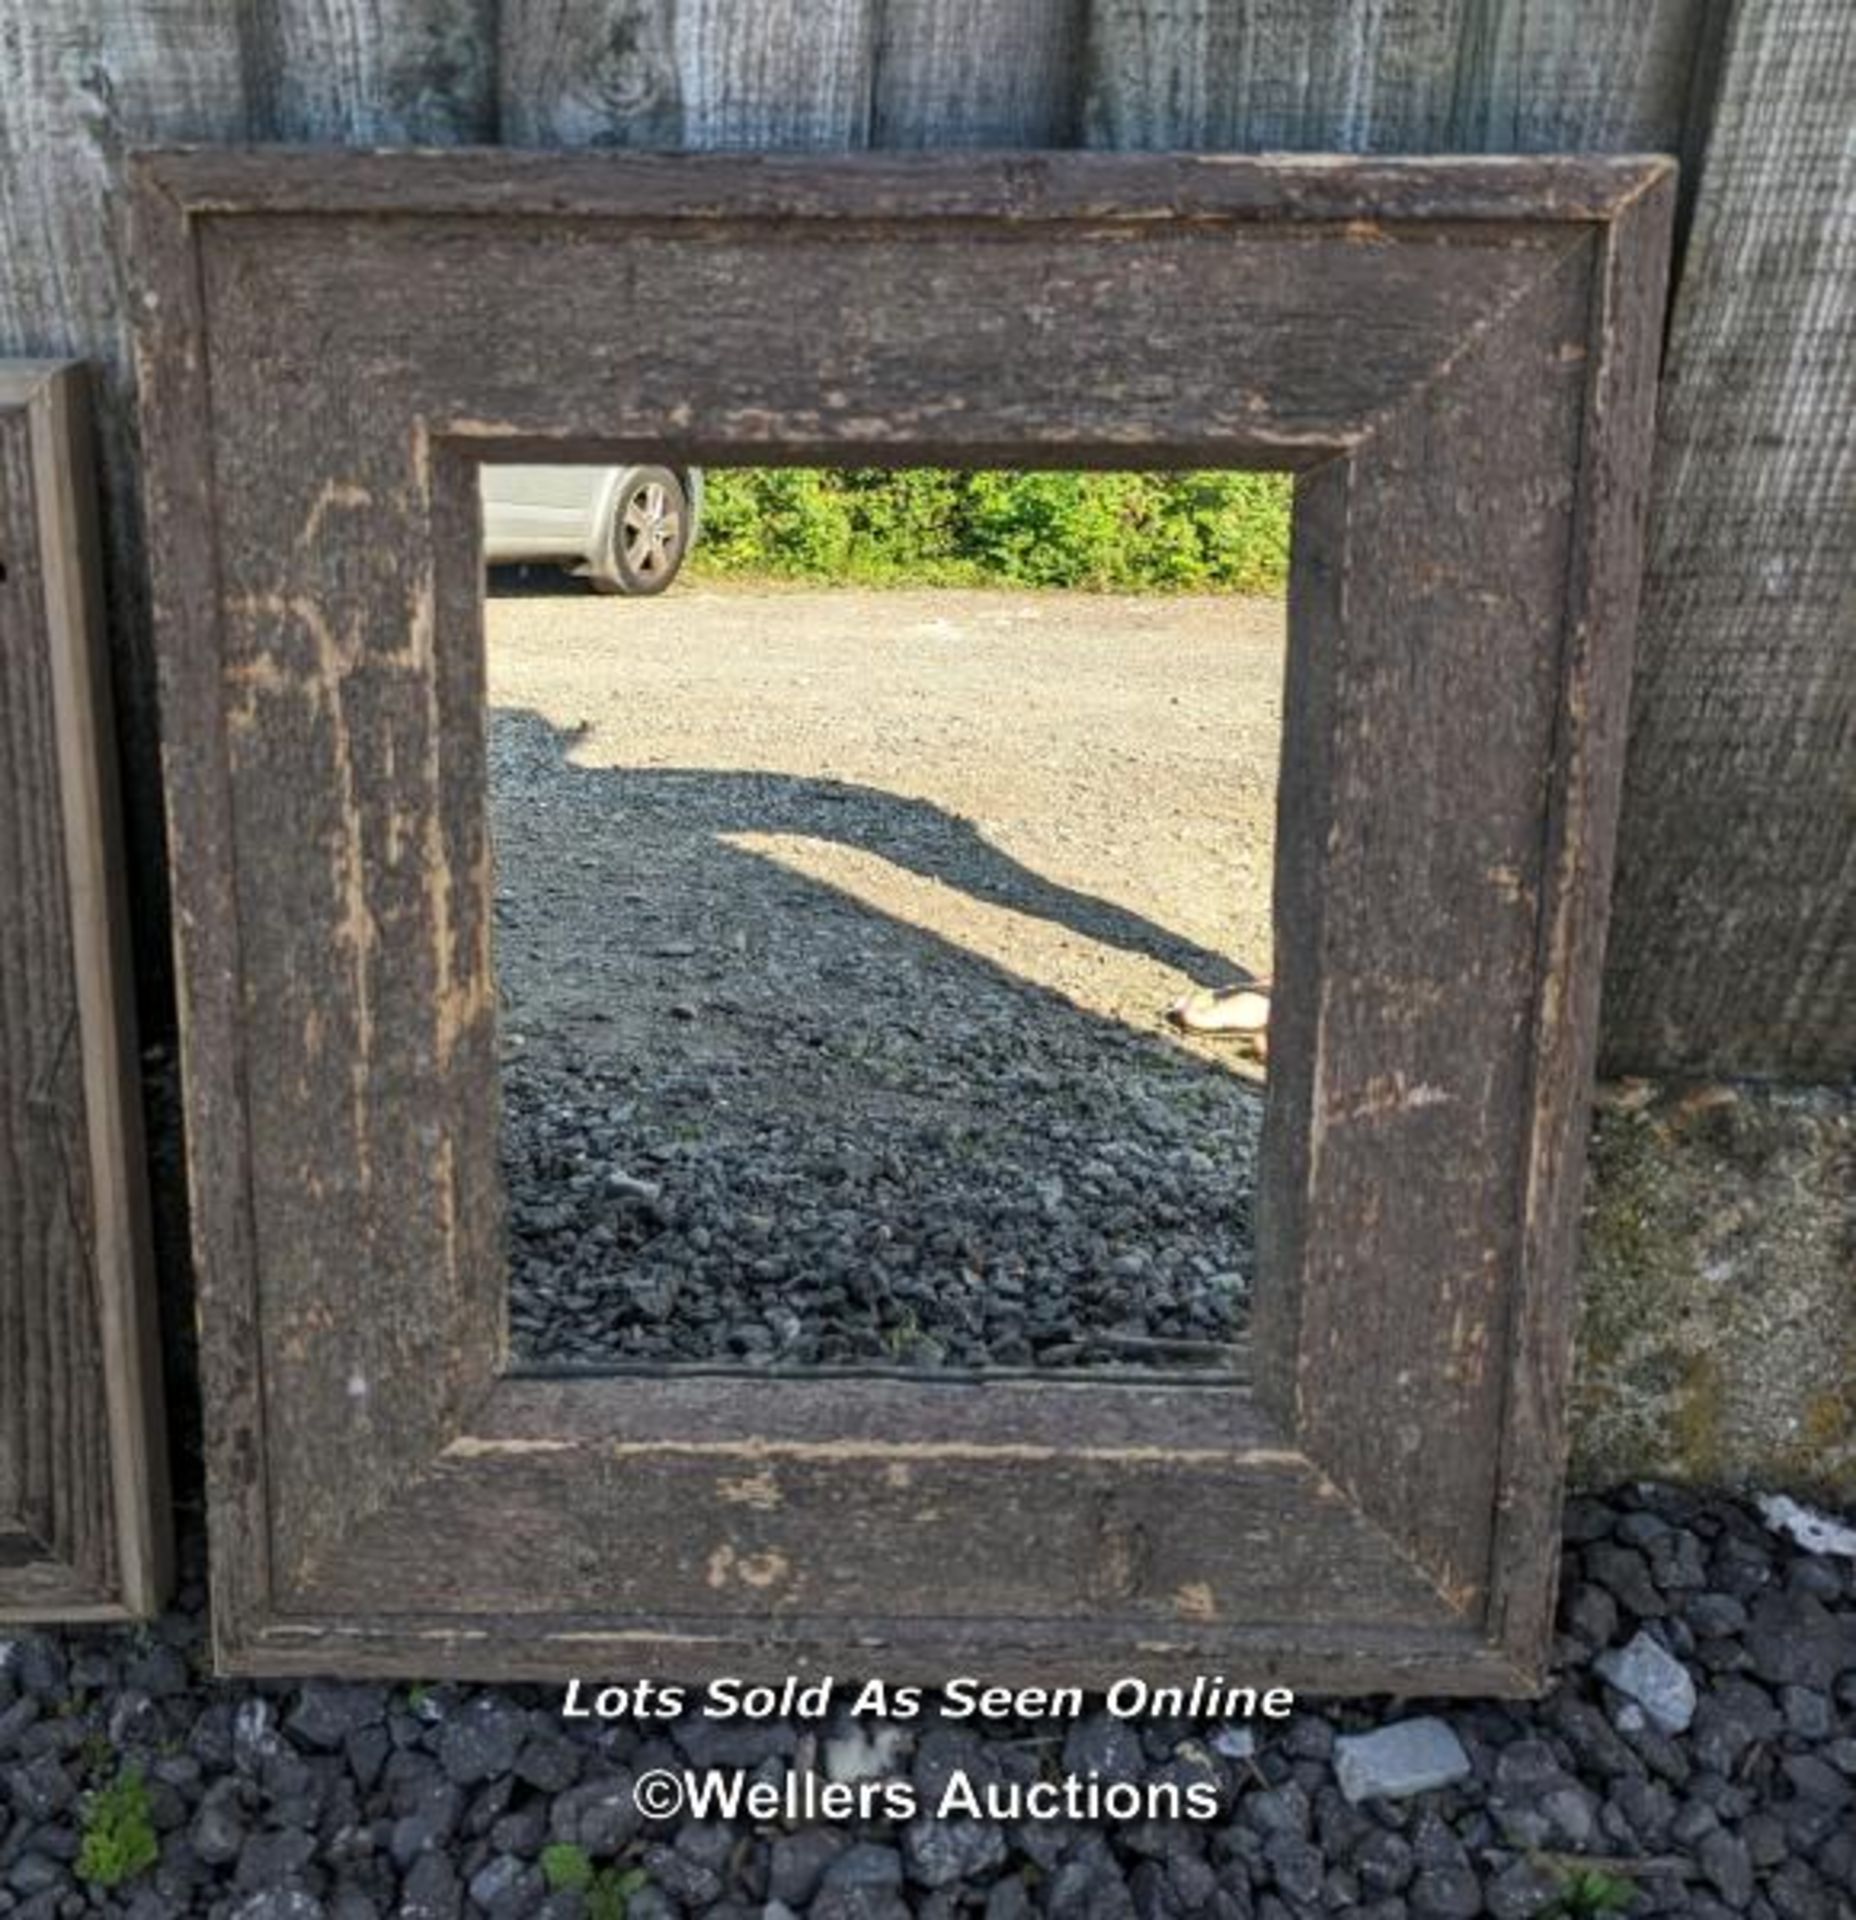 2 reclaimed and rustic pine mirrors with old mirror glass - Image 4 of 6